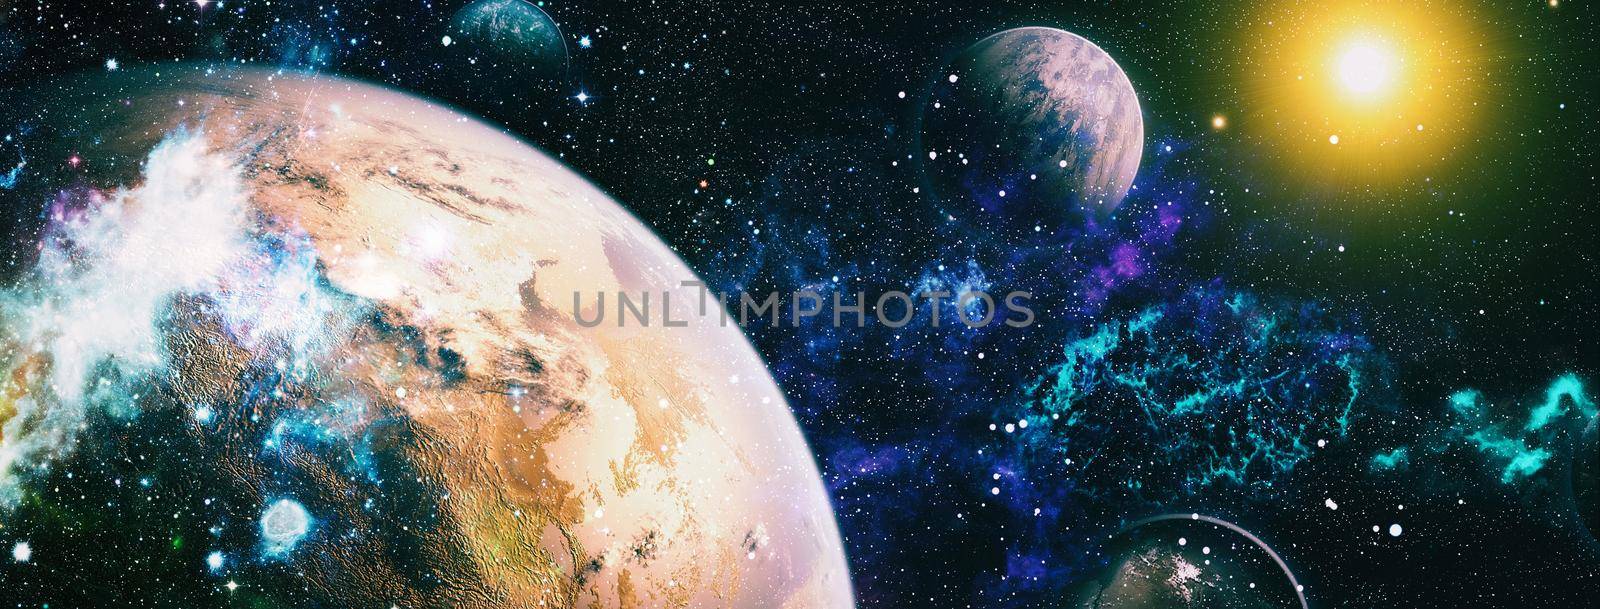 Space scene with planets, stars and galaxies. Spiral galaxy in deep space. Stars of a planet and galaxy in a free space. Elements of this image furnished by NASA.